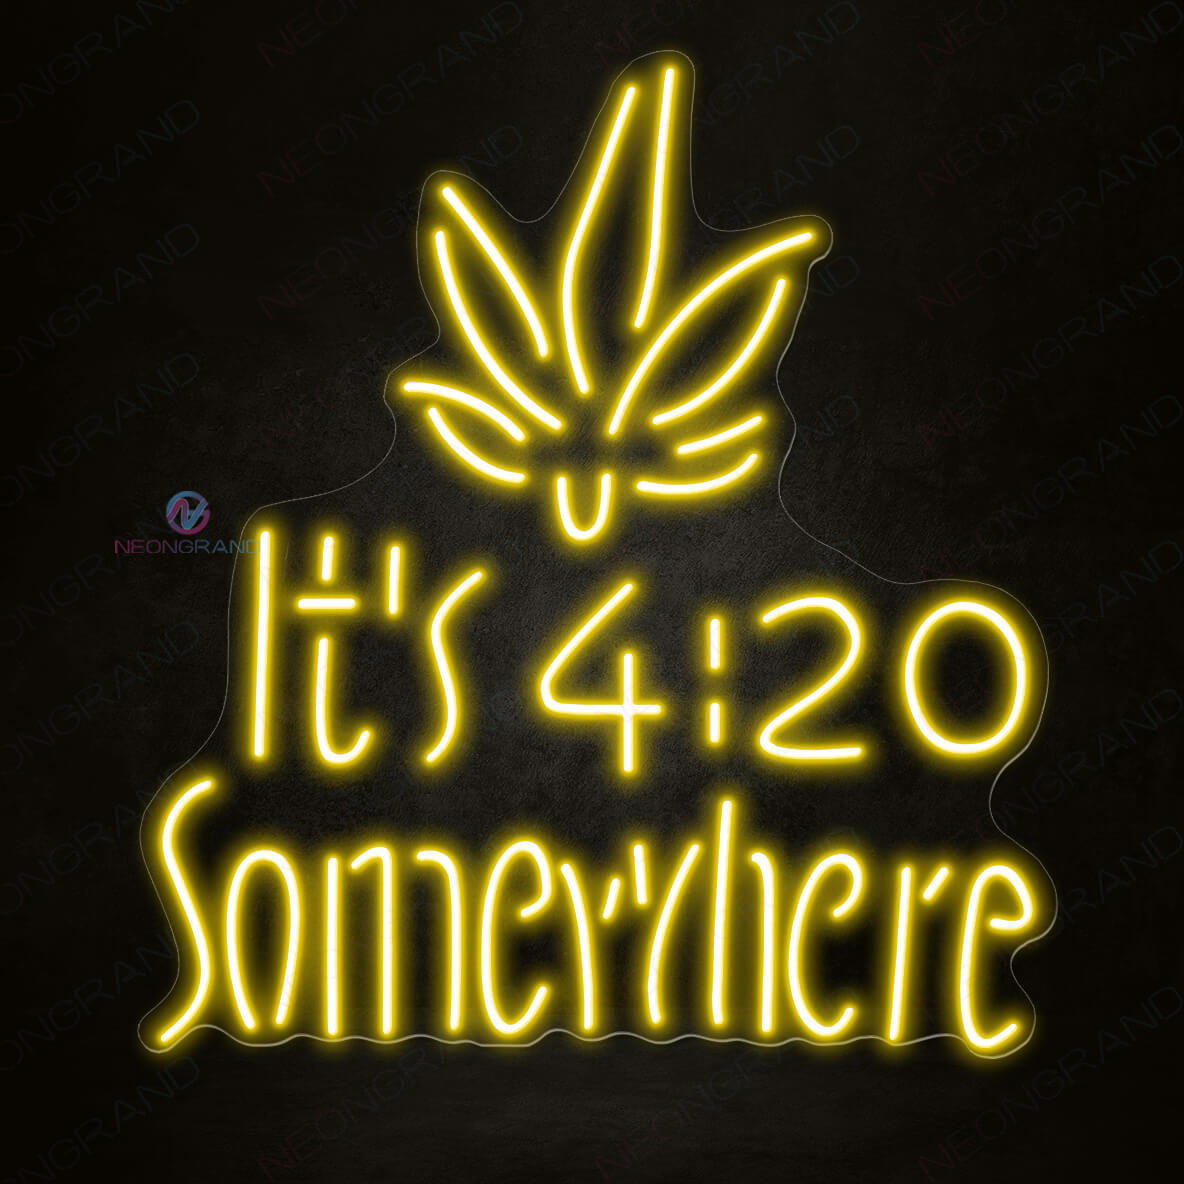 Its 420 Somewhere Neon Sign Weed Led Light yellow